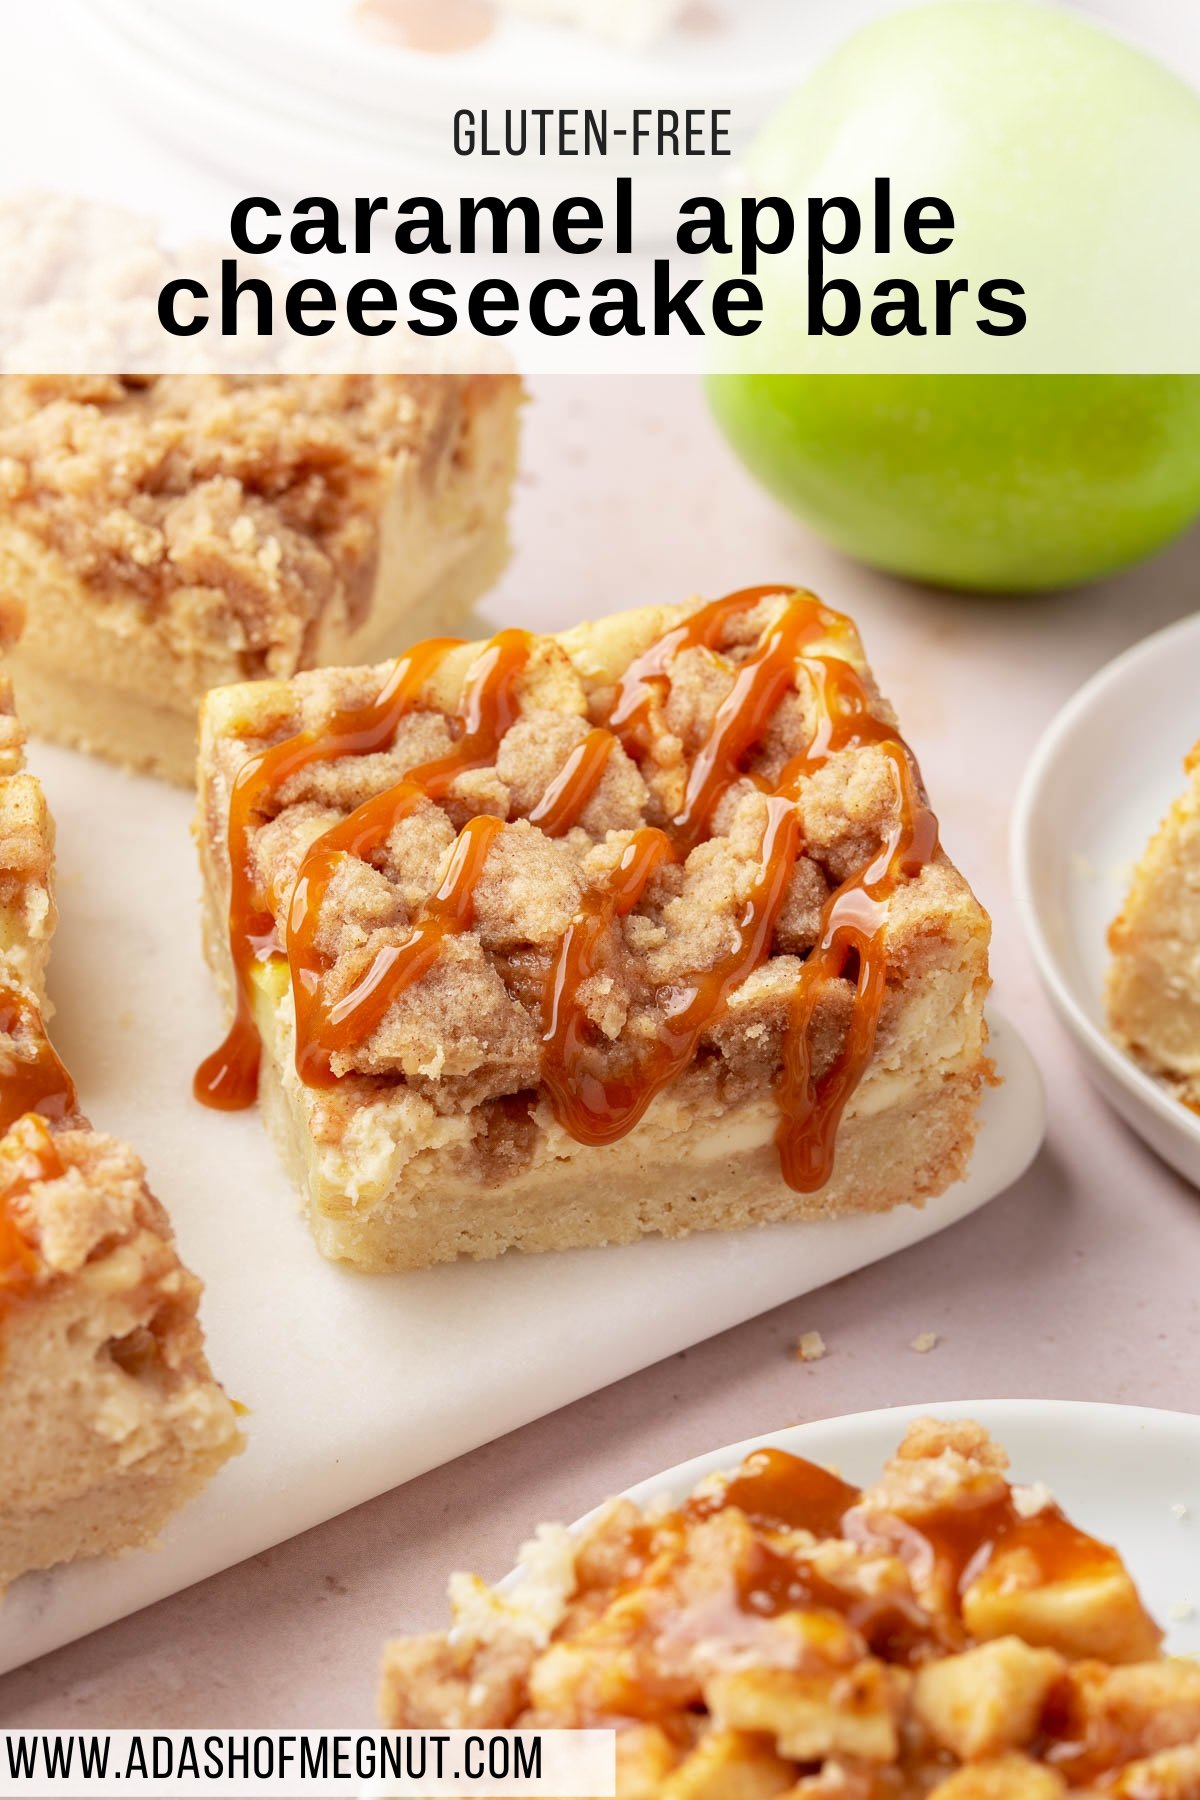 A gluten free cheesecake bar with apples, streusel and caramel drizzle on a platter with additional gluten free bars scattered around.